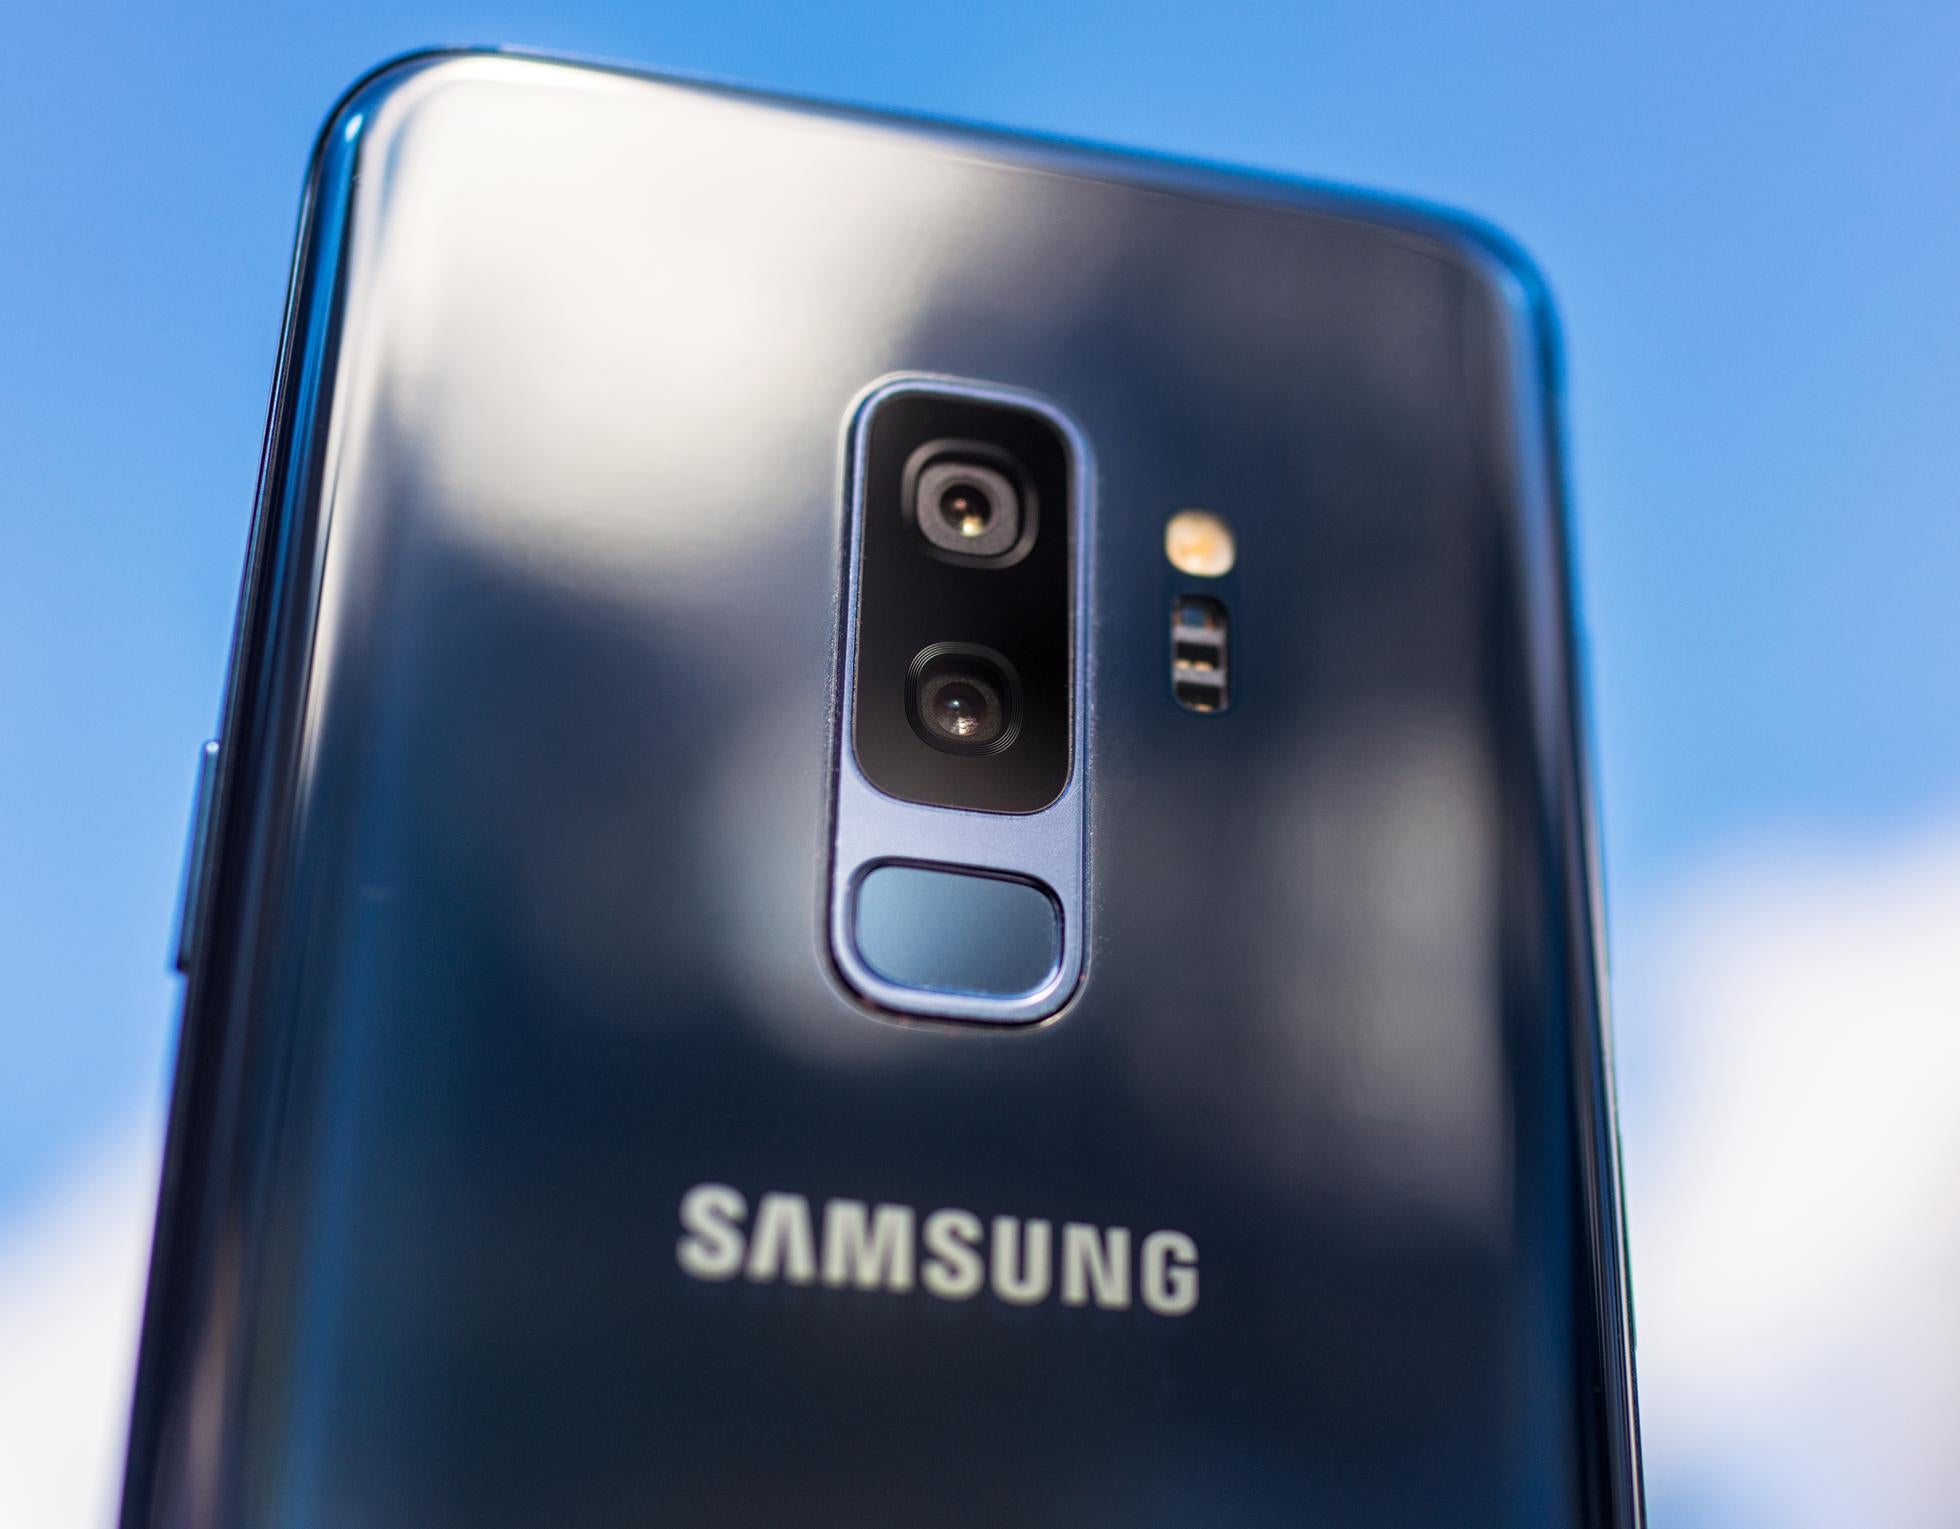 The successor to the Samsung Galaxy S9 could be significantly faster